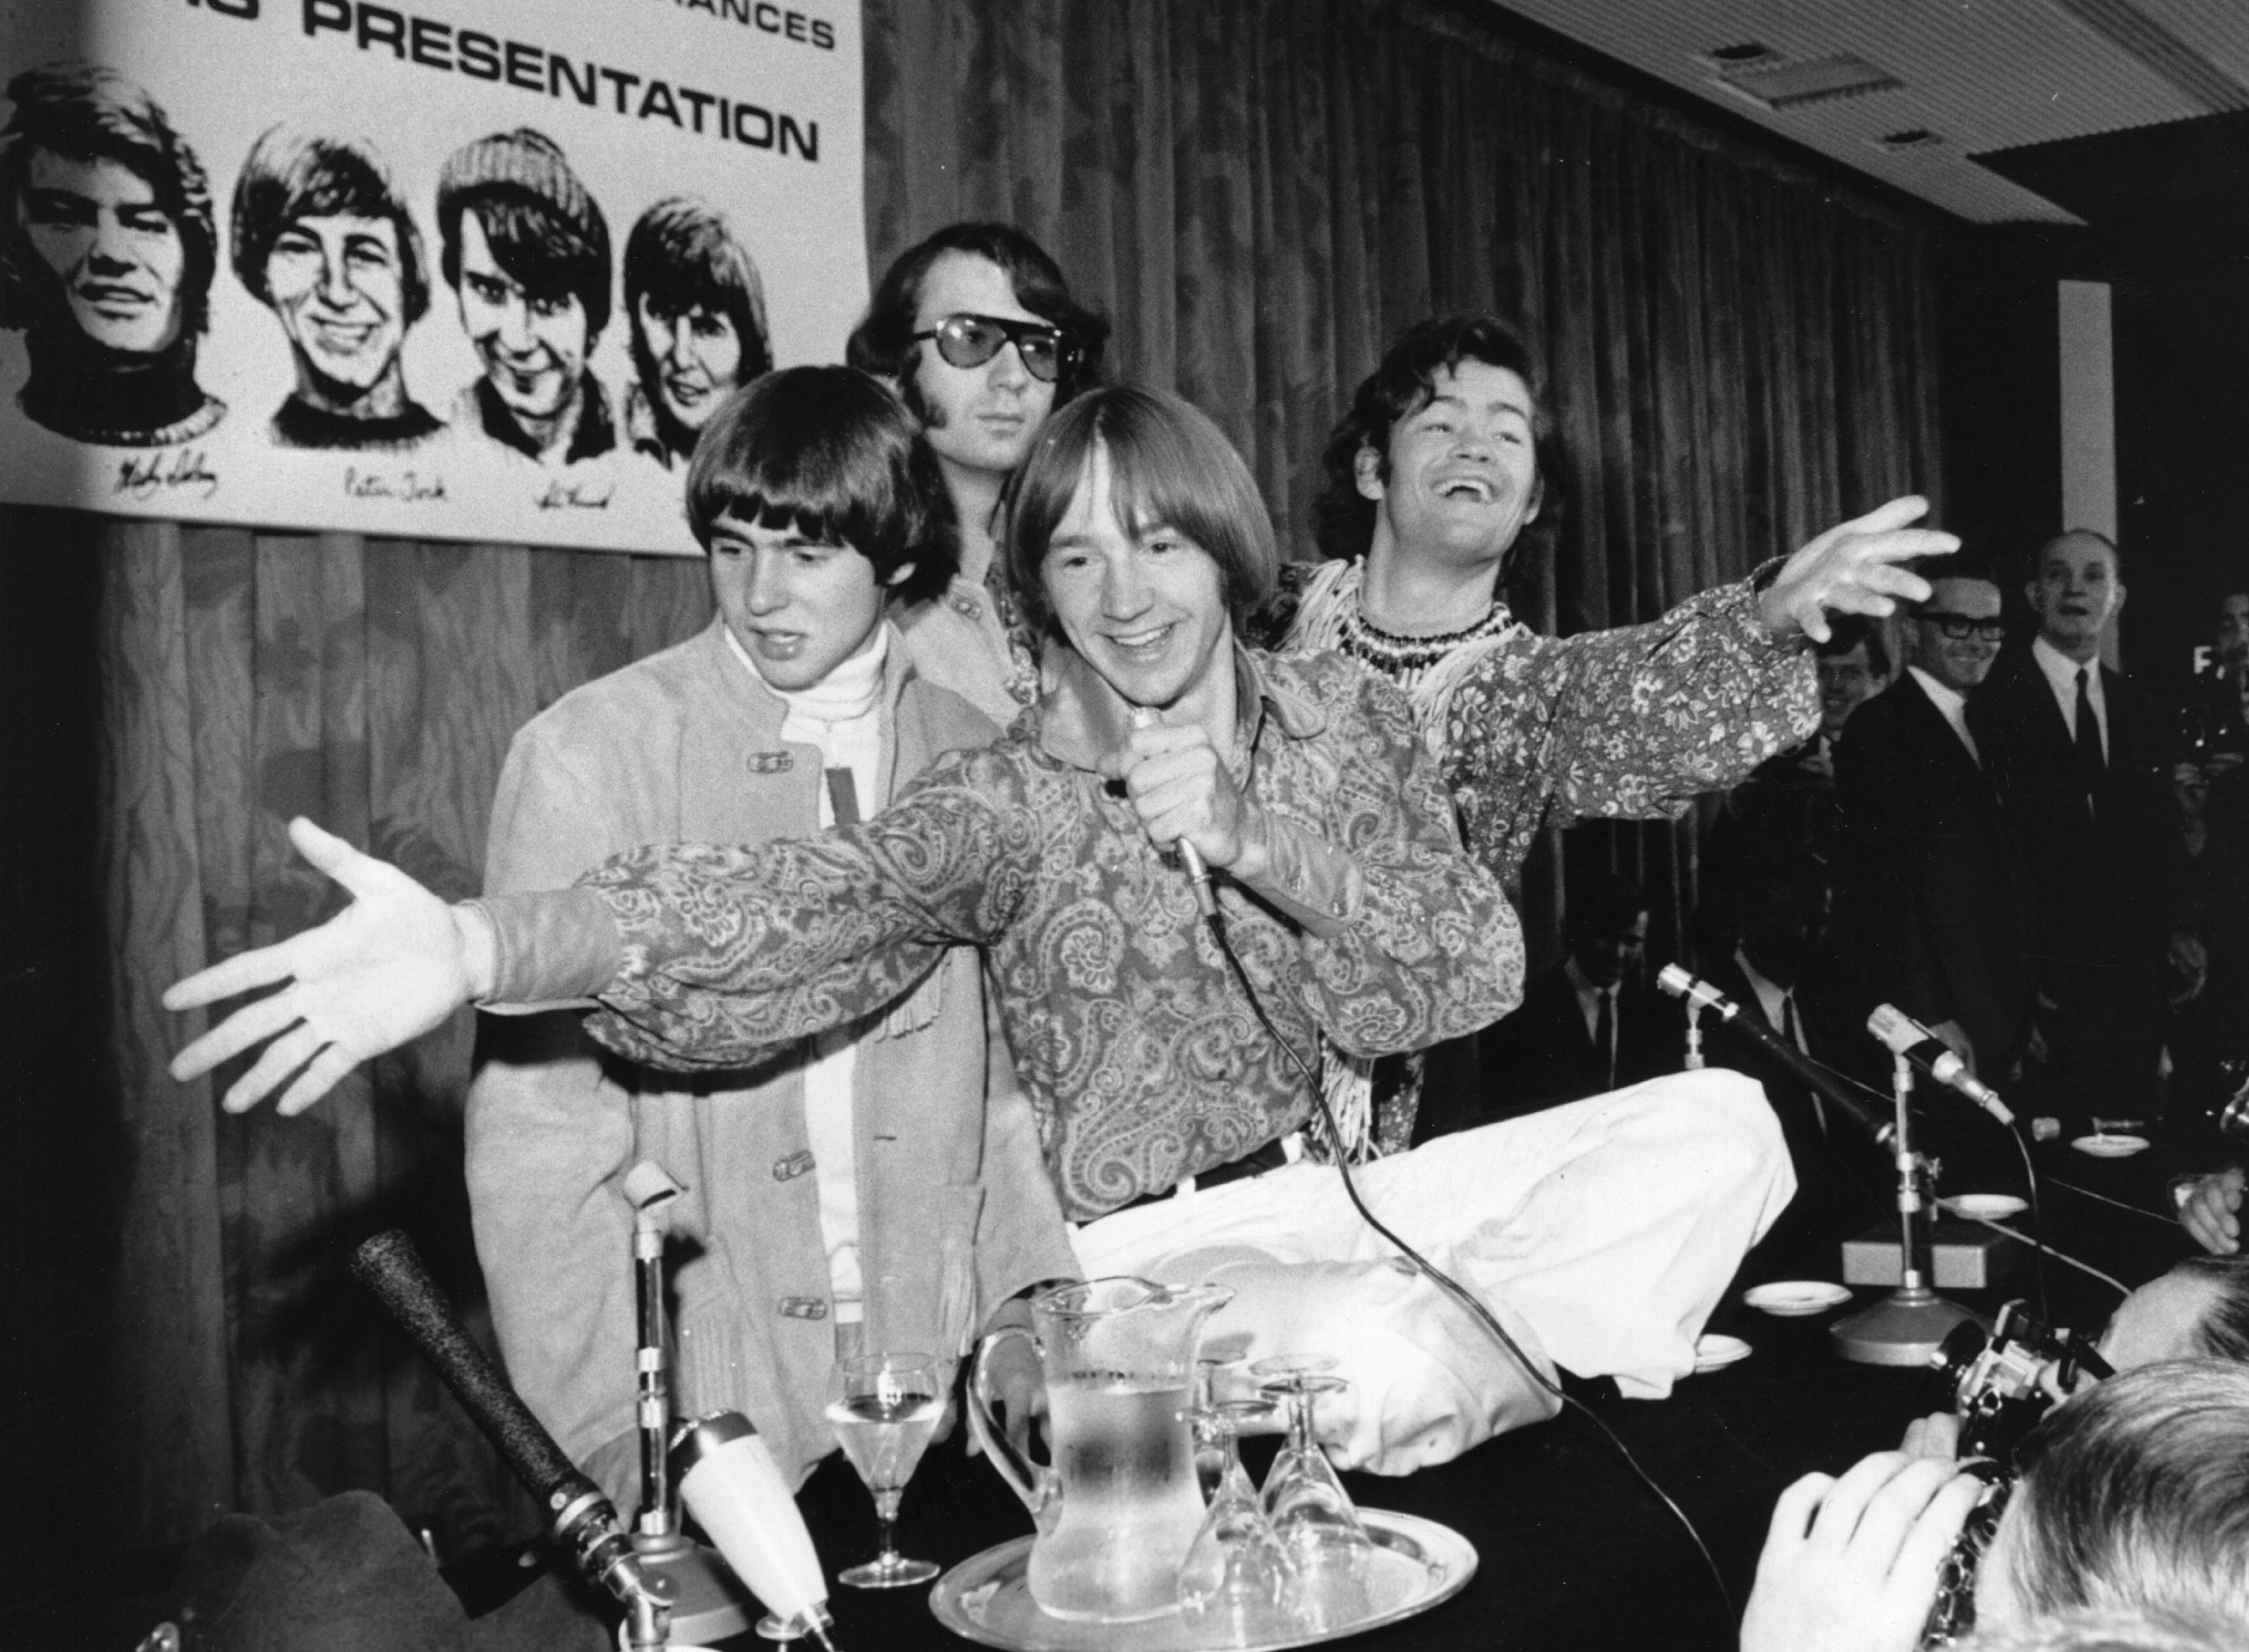 The Monkees' Davy Jones, Mike Nesmith, Peter Tork, and Micky Dolenz near a poster